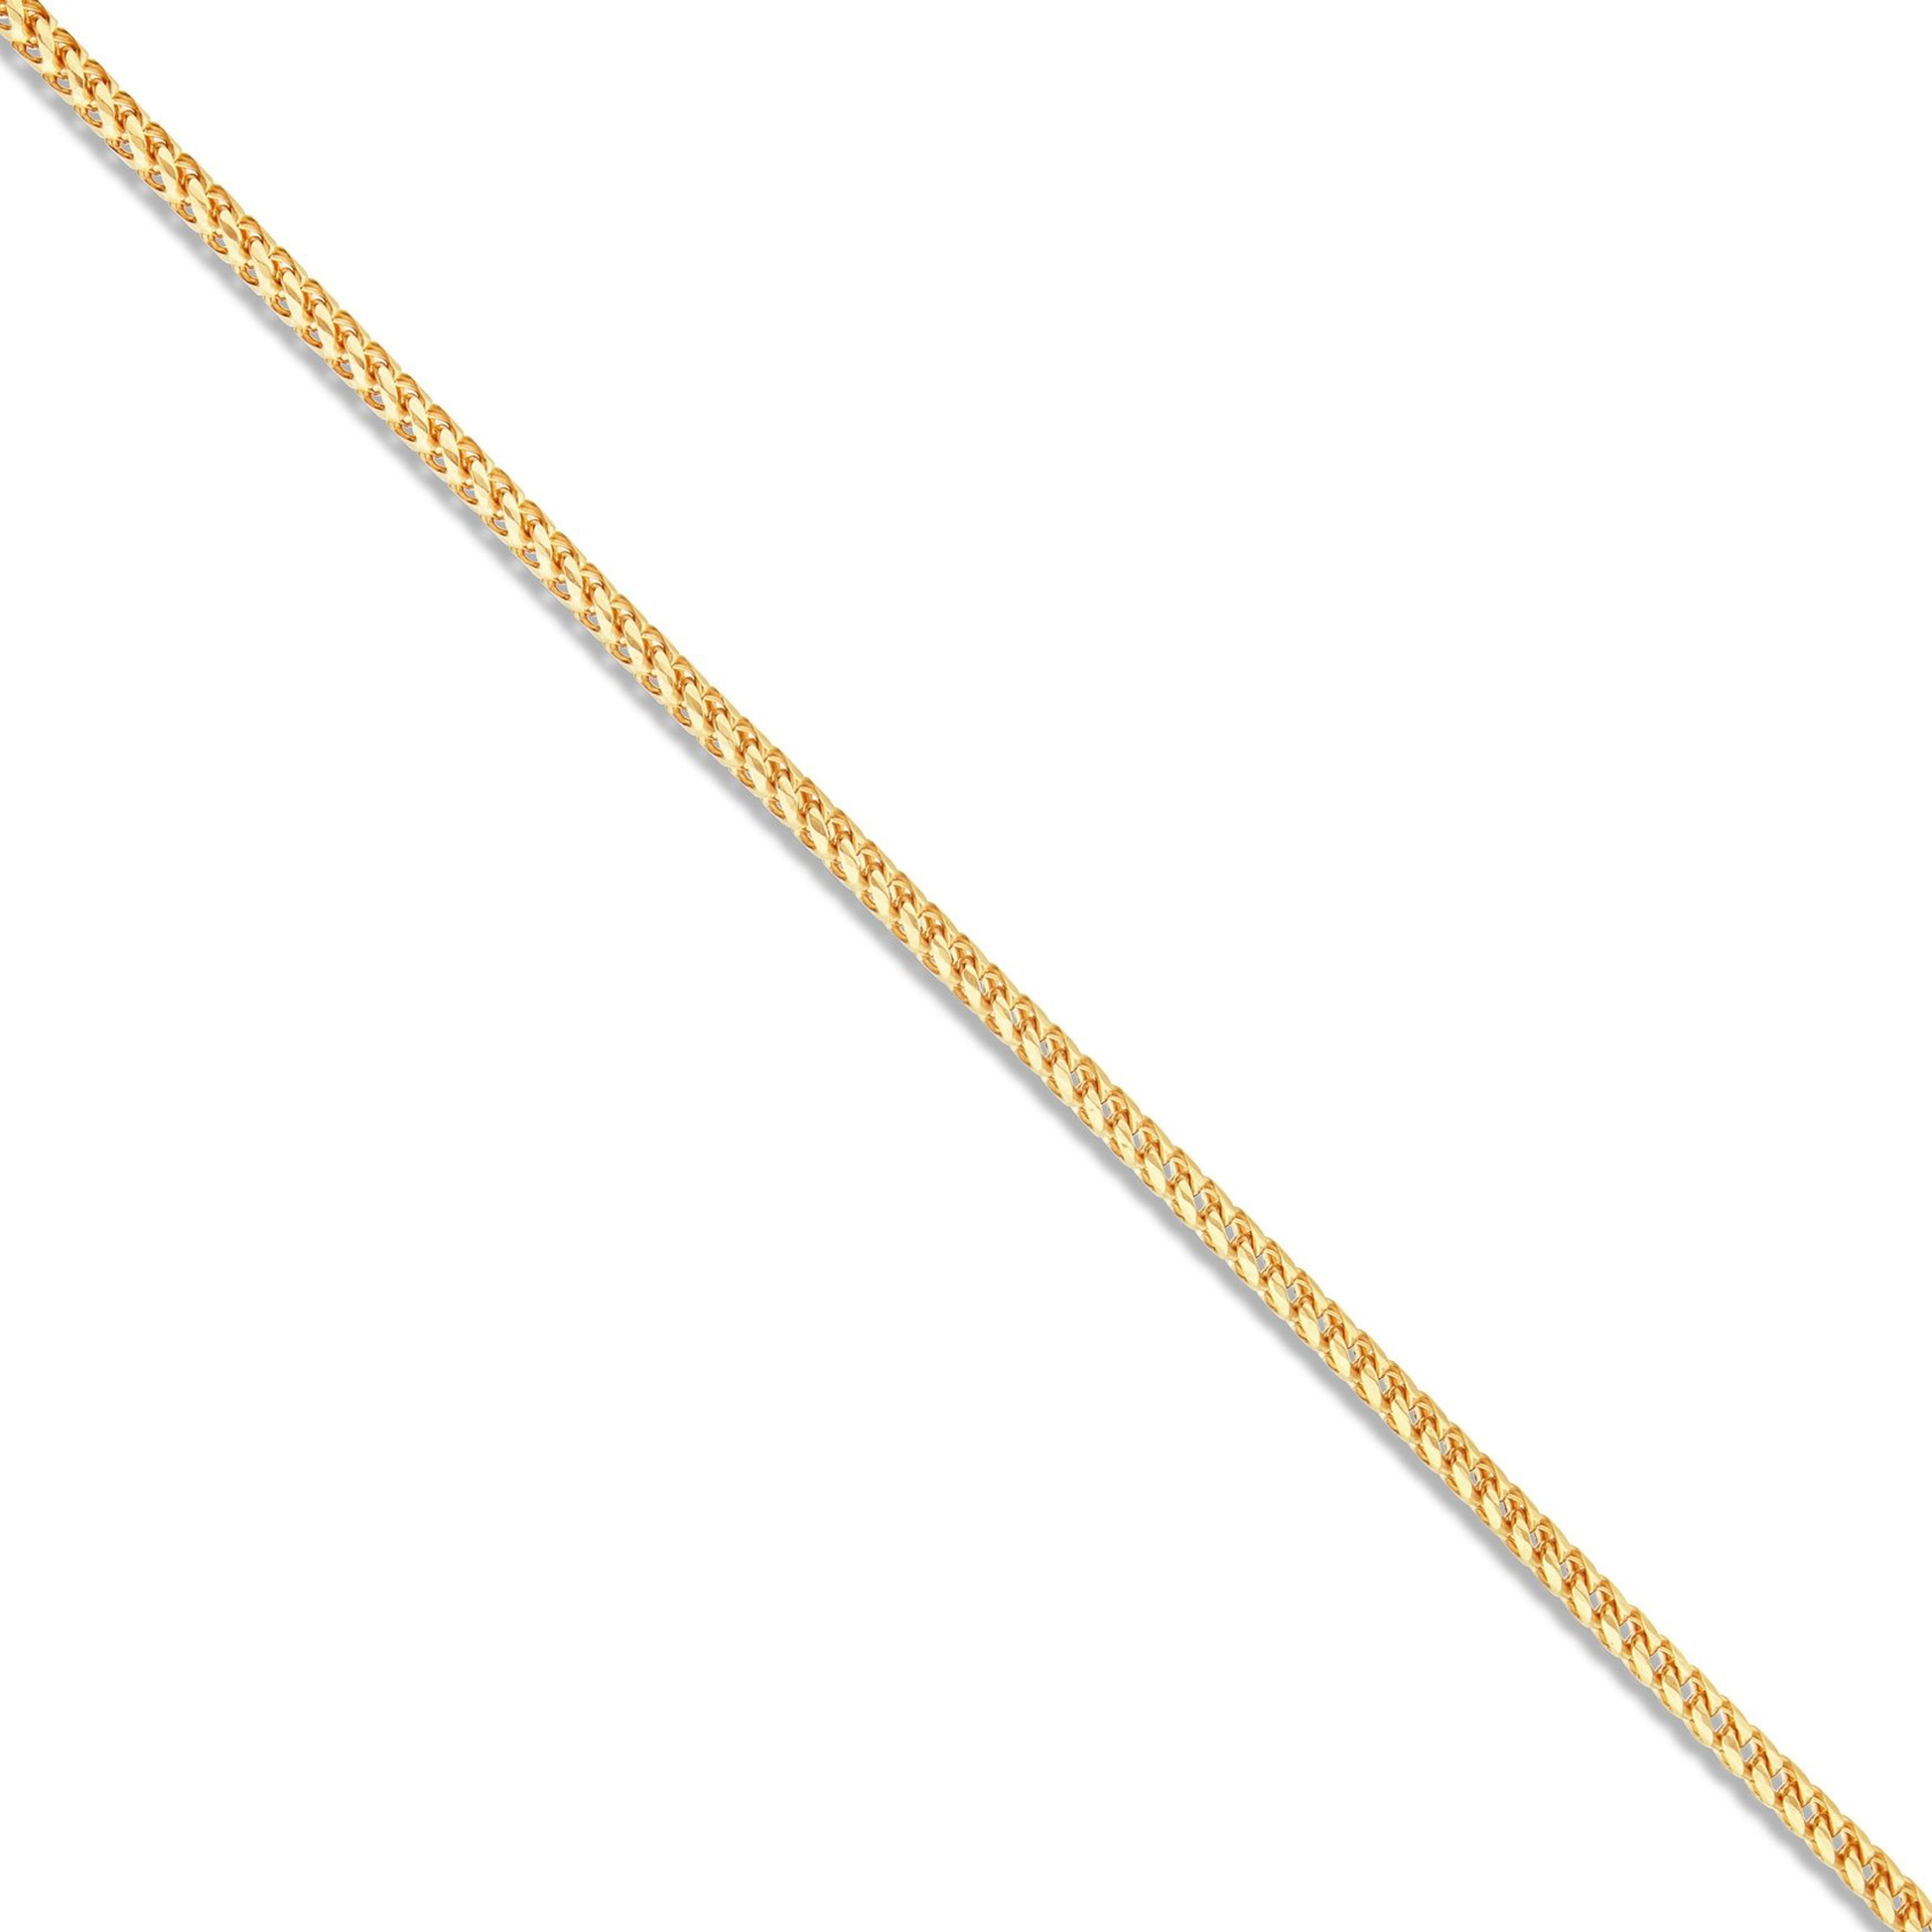 10K Solid Gold 3mm Franco Chain